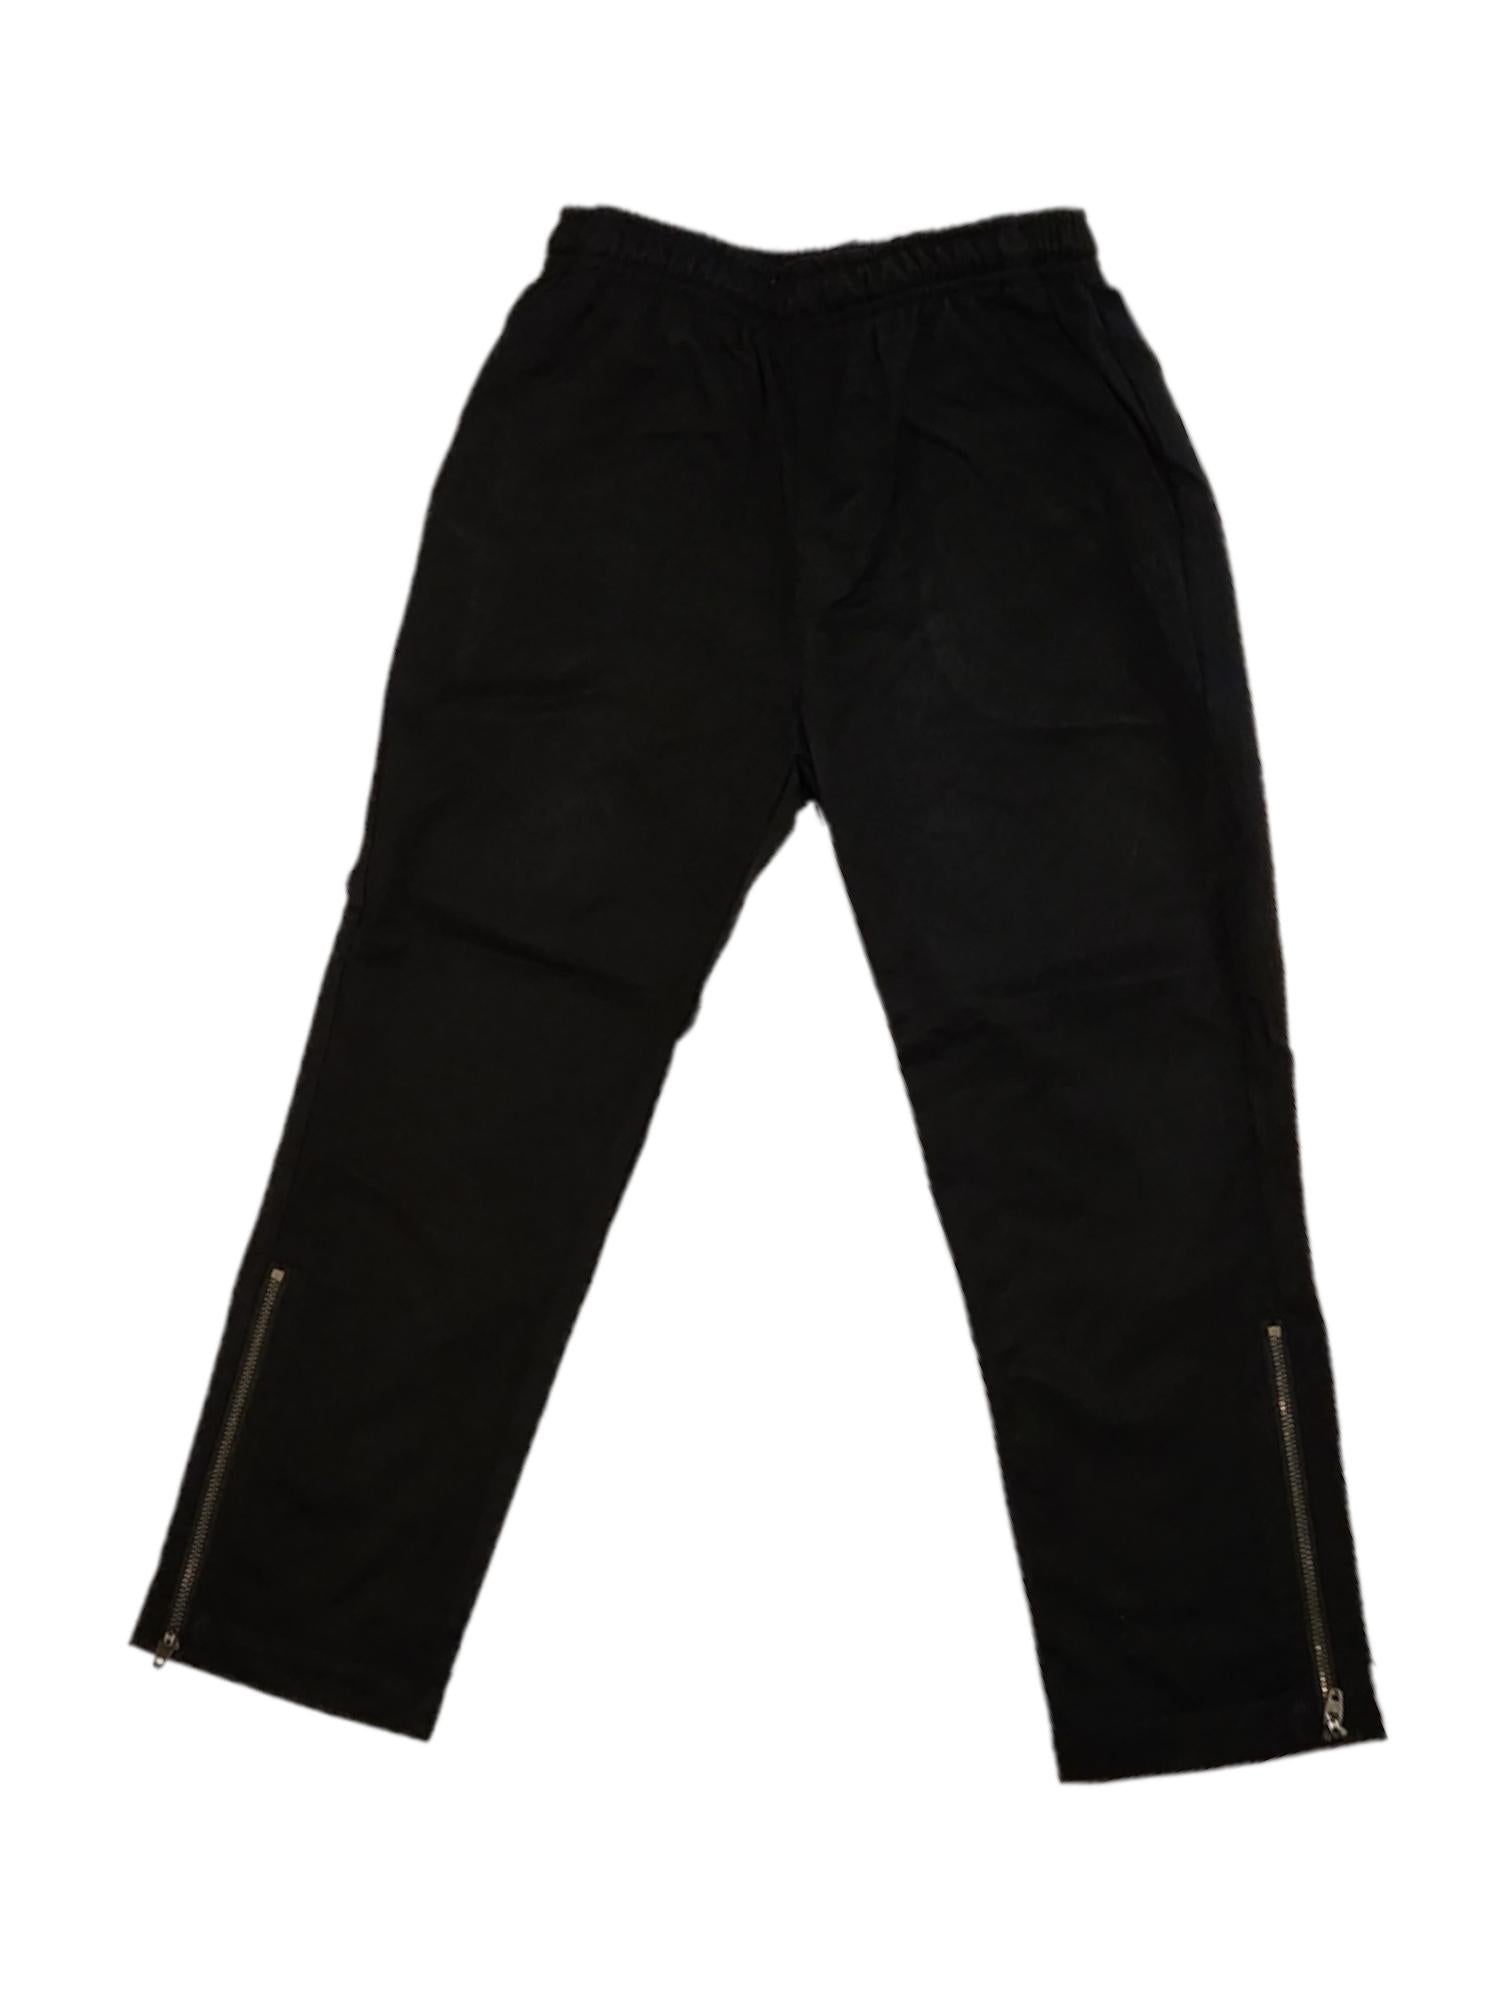 Lloyd style black cotton polyester trouser with metal zips at ankles